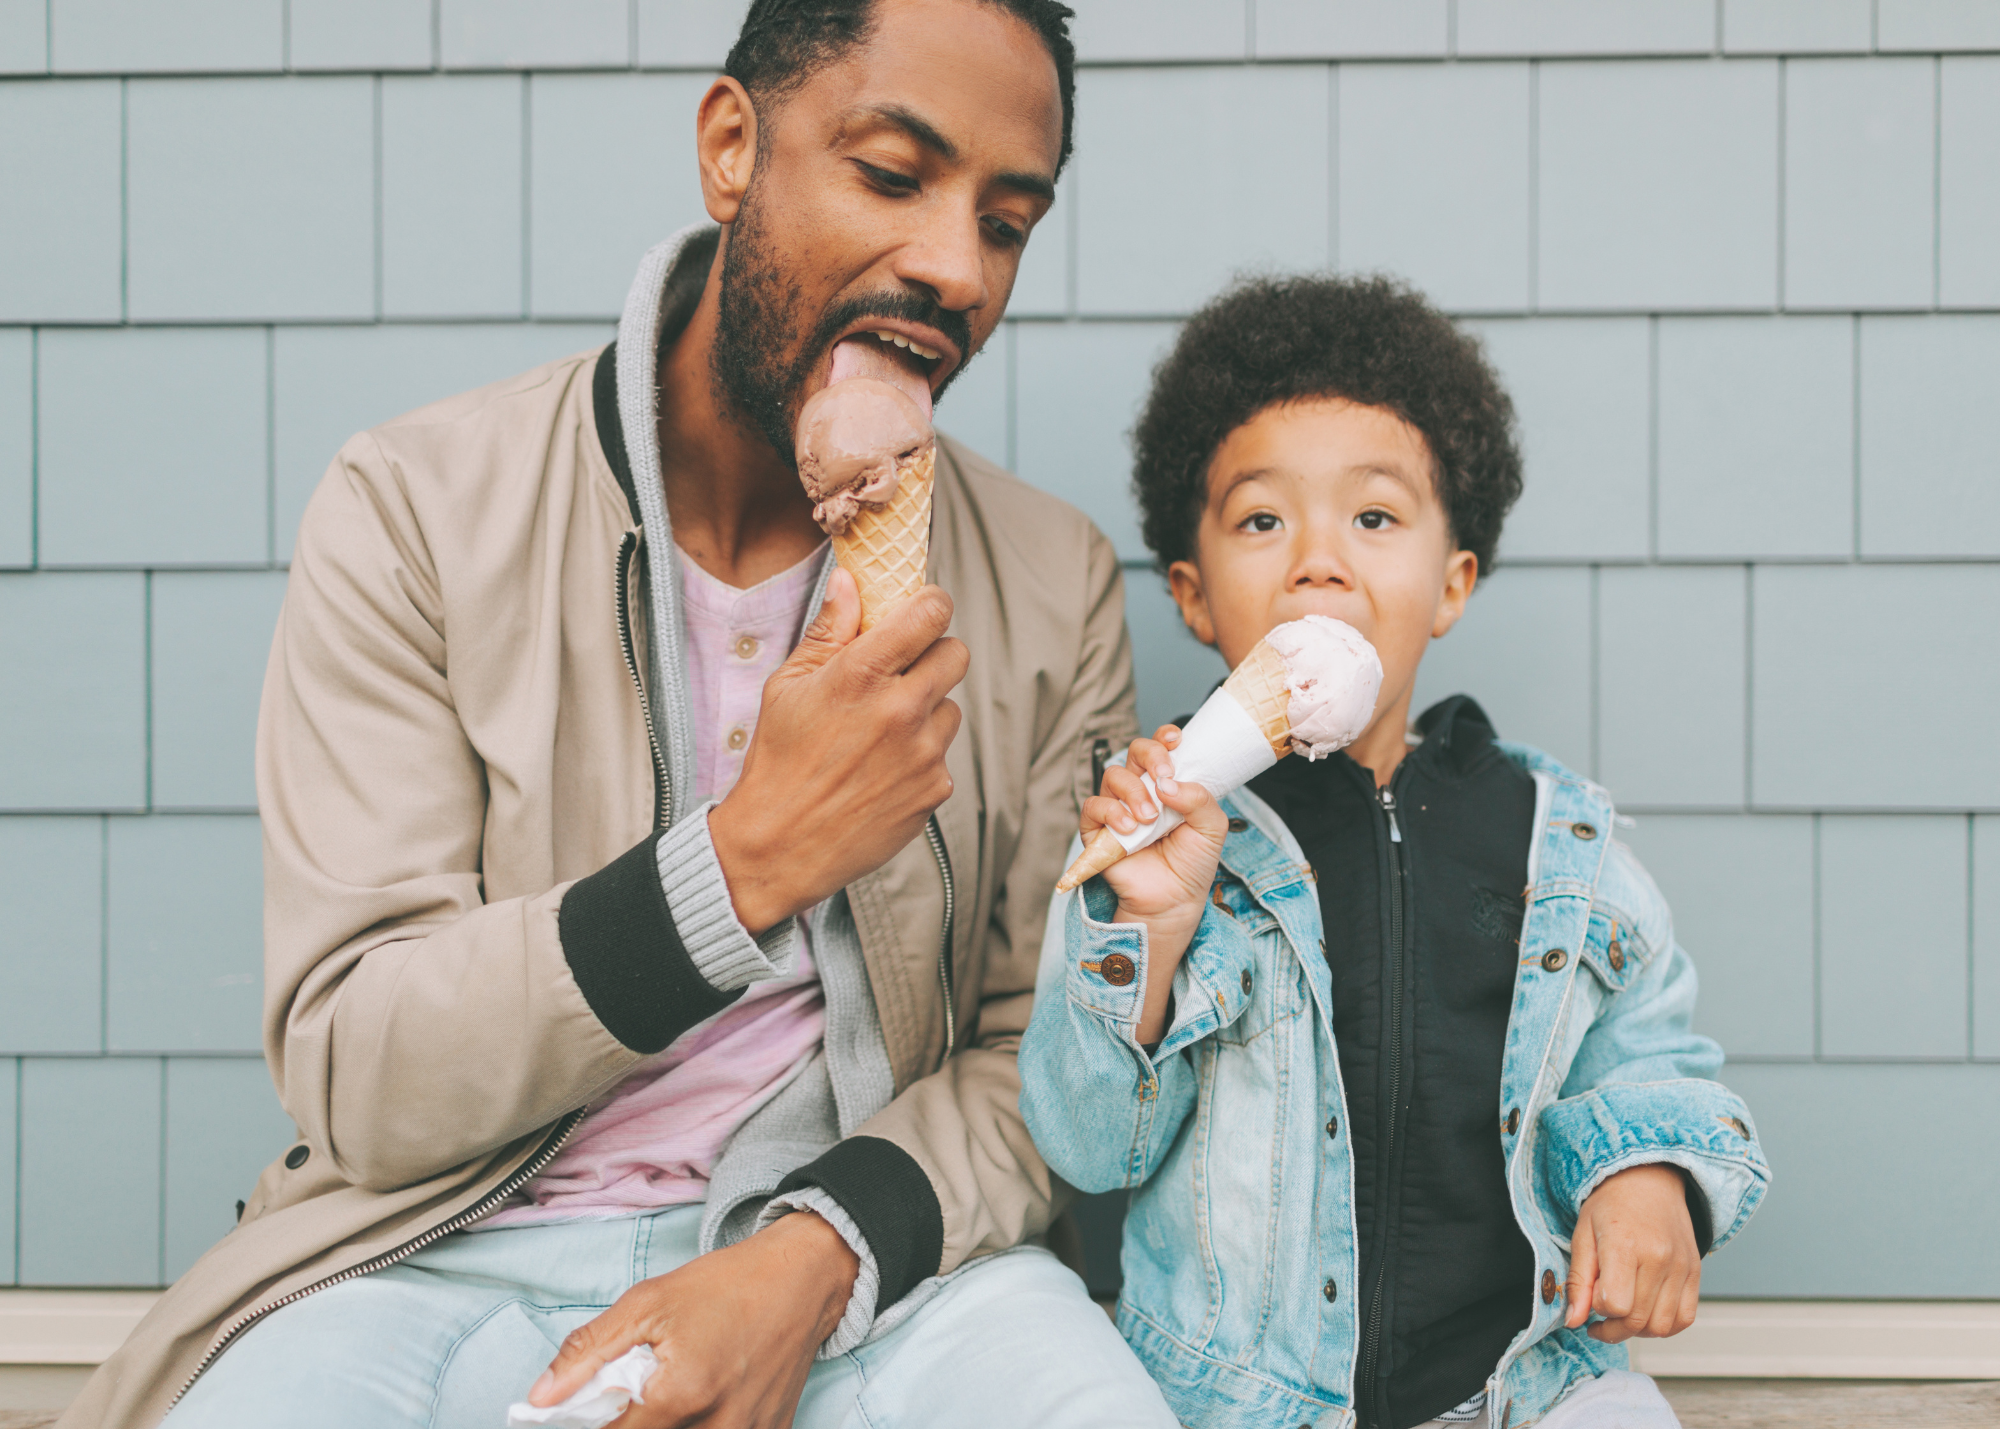 Photo of a dad eating ice cream with his son.